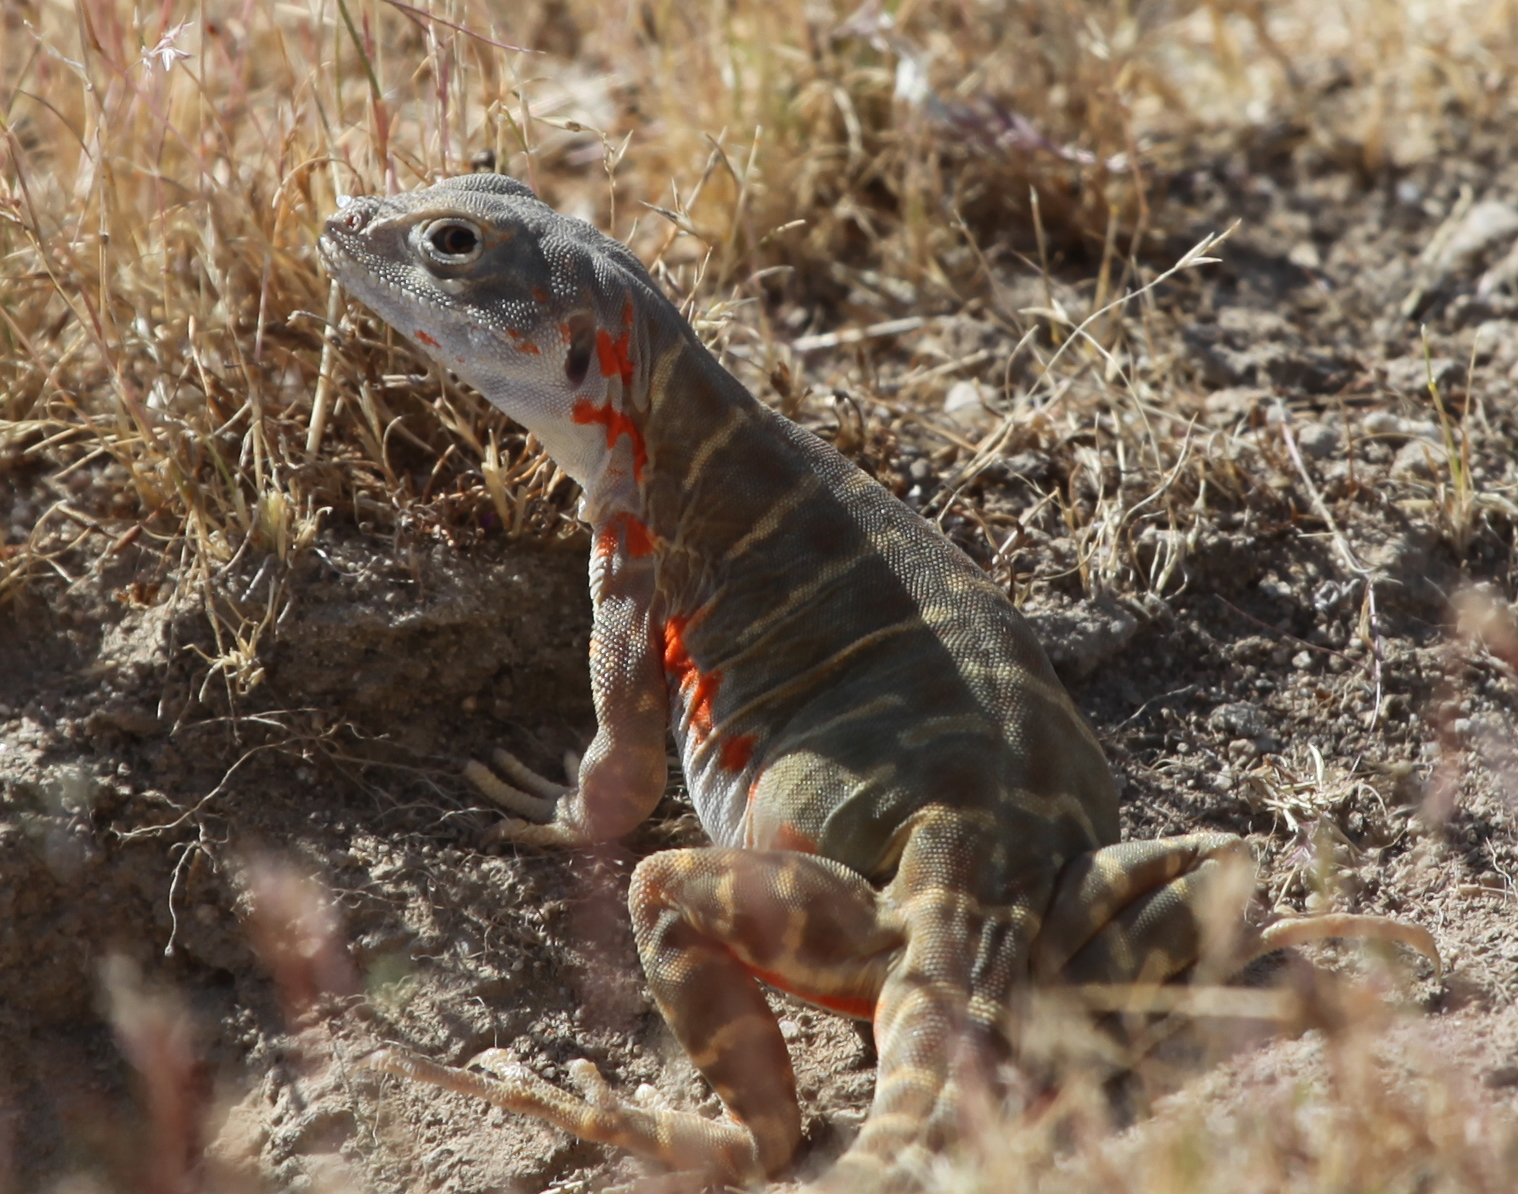 A pregnant female leopard lizards with bright colorful markings along its side sits on the ground in dry brushy habitat.